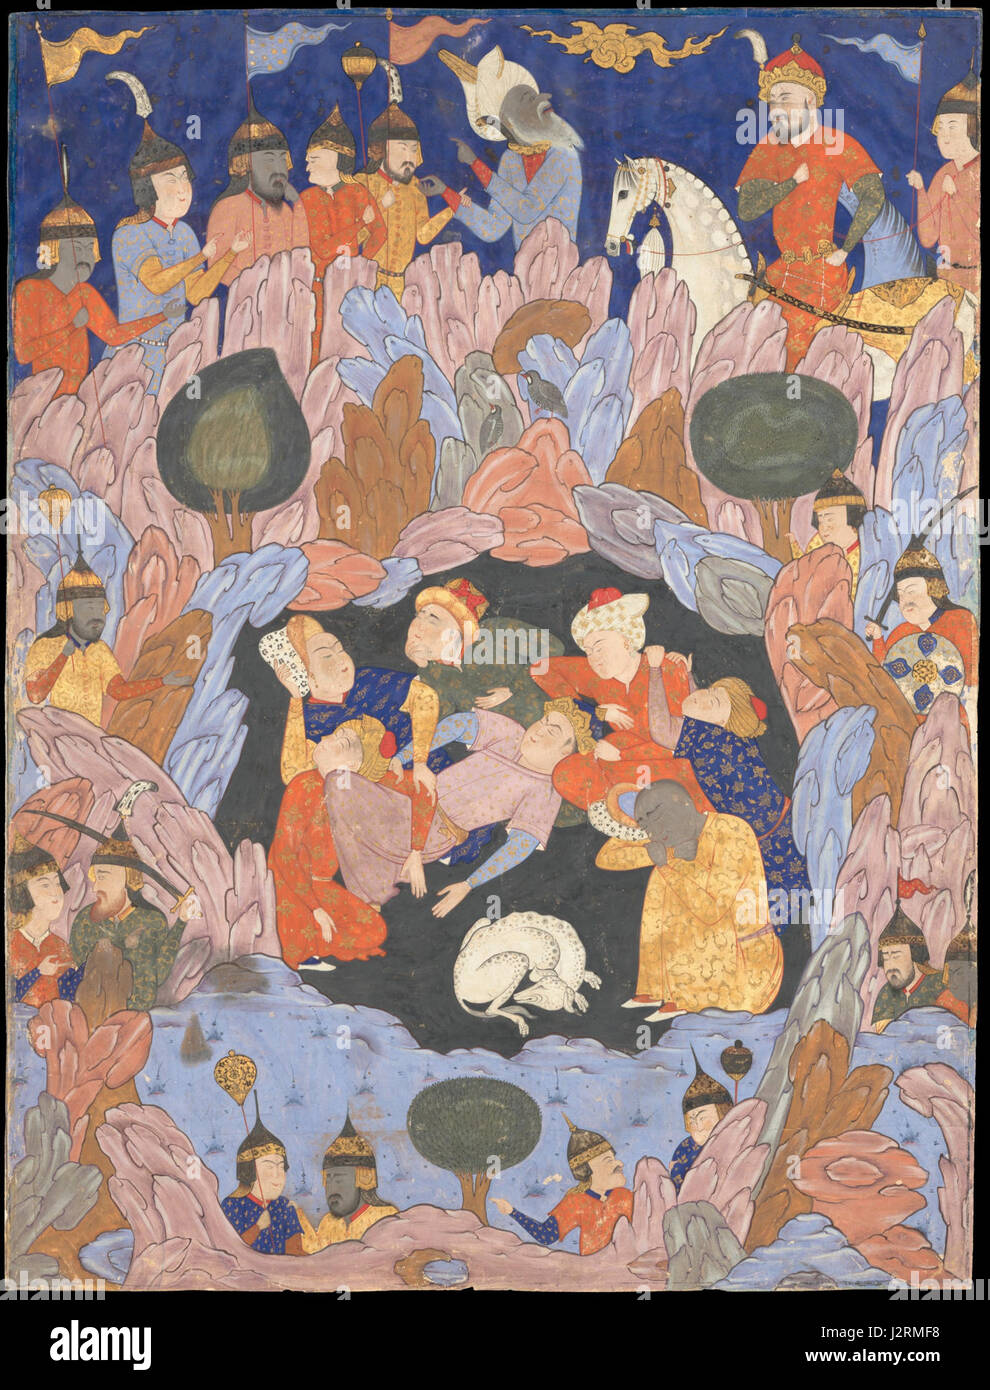 Abd al-Aziz and Aqa Mirek (attr.),The Seven Sleepers of Ephesus Discovered by Alexander the Great, Folio from a Falnama (Book of Omens) 1550s Qazvin, Metmuseum Stock Photo